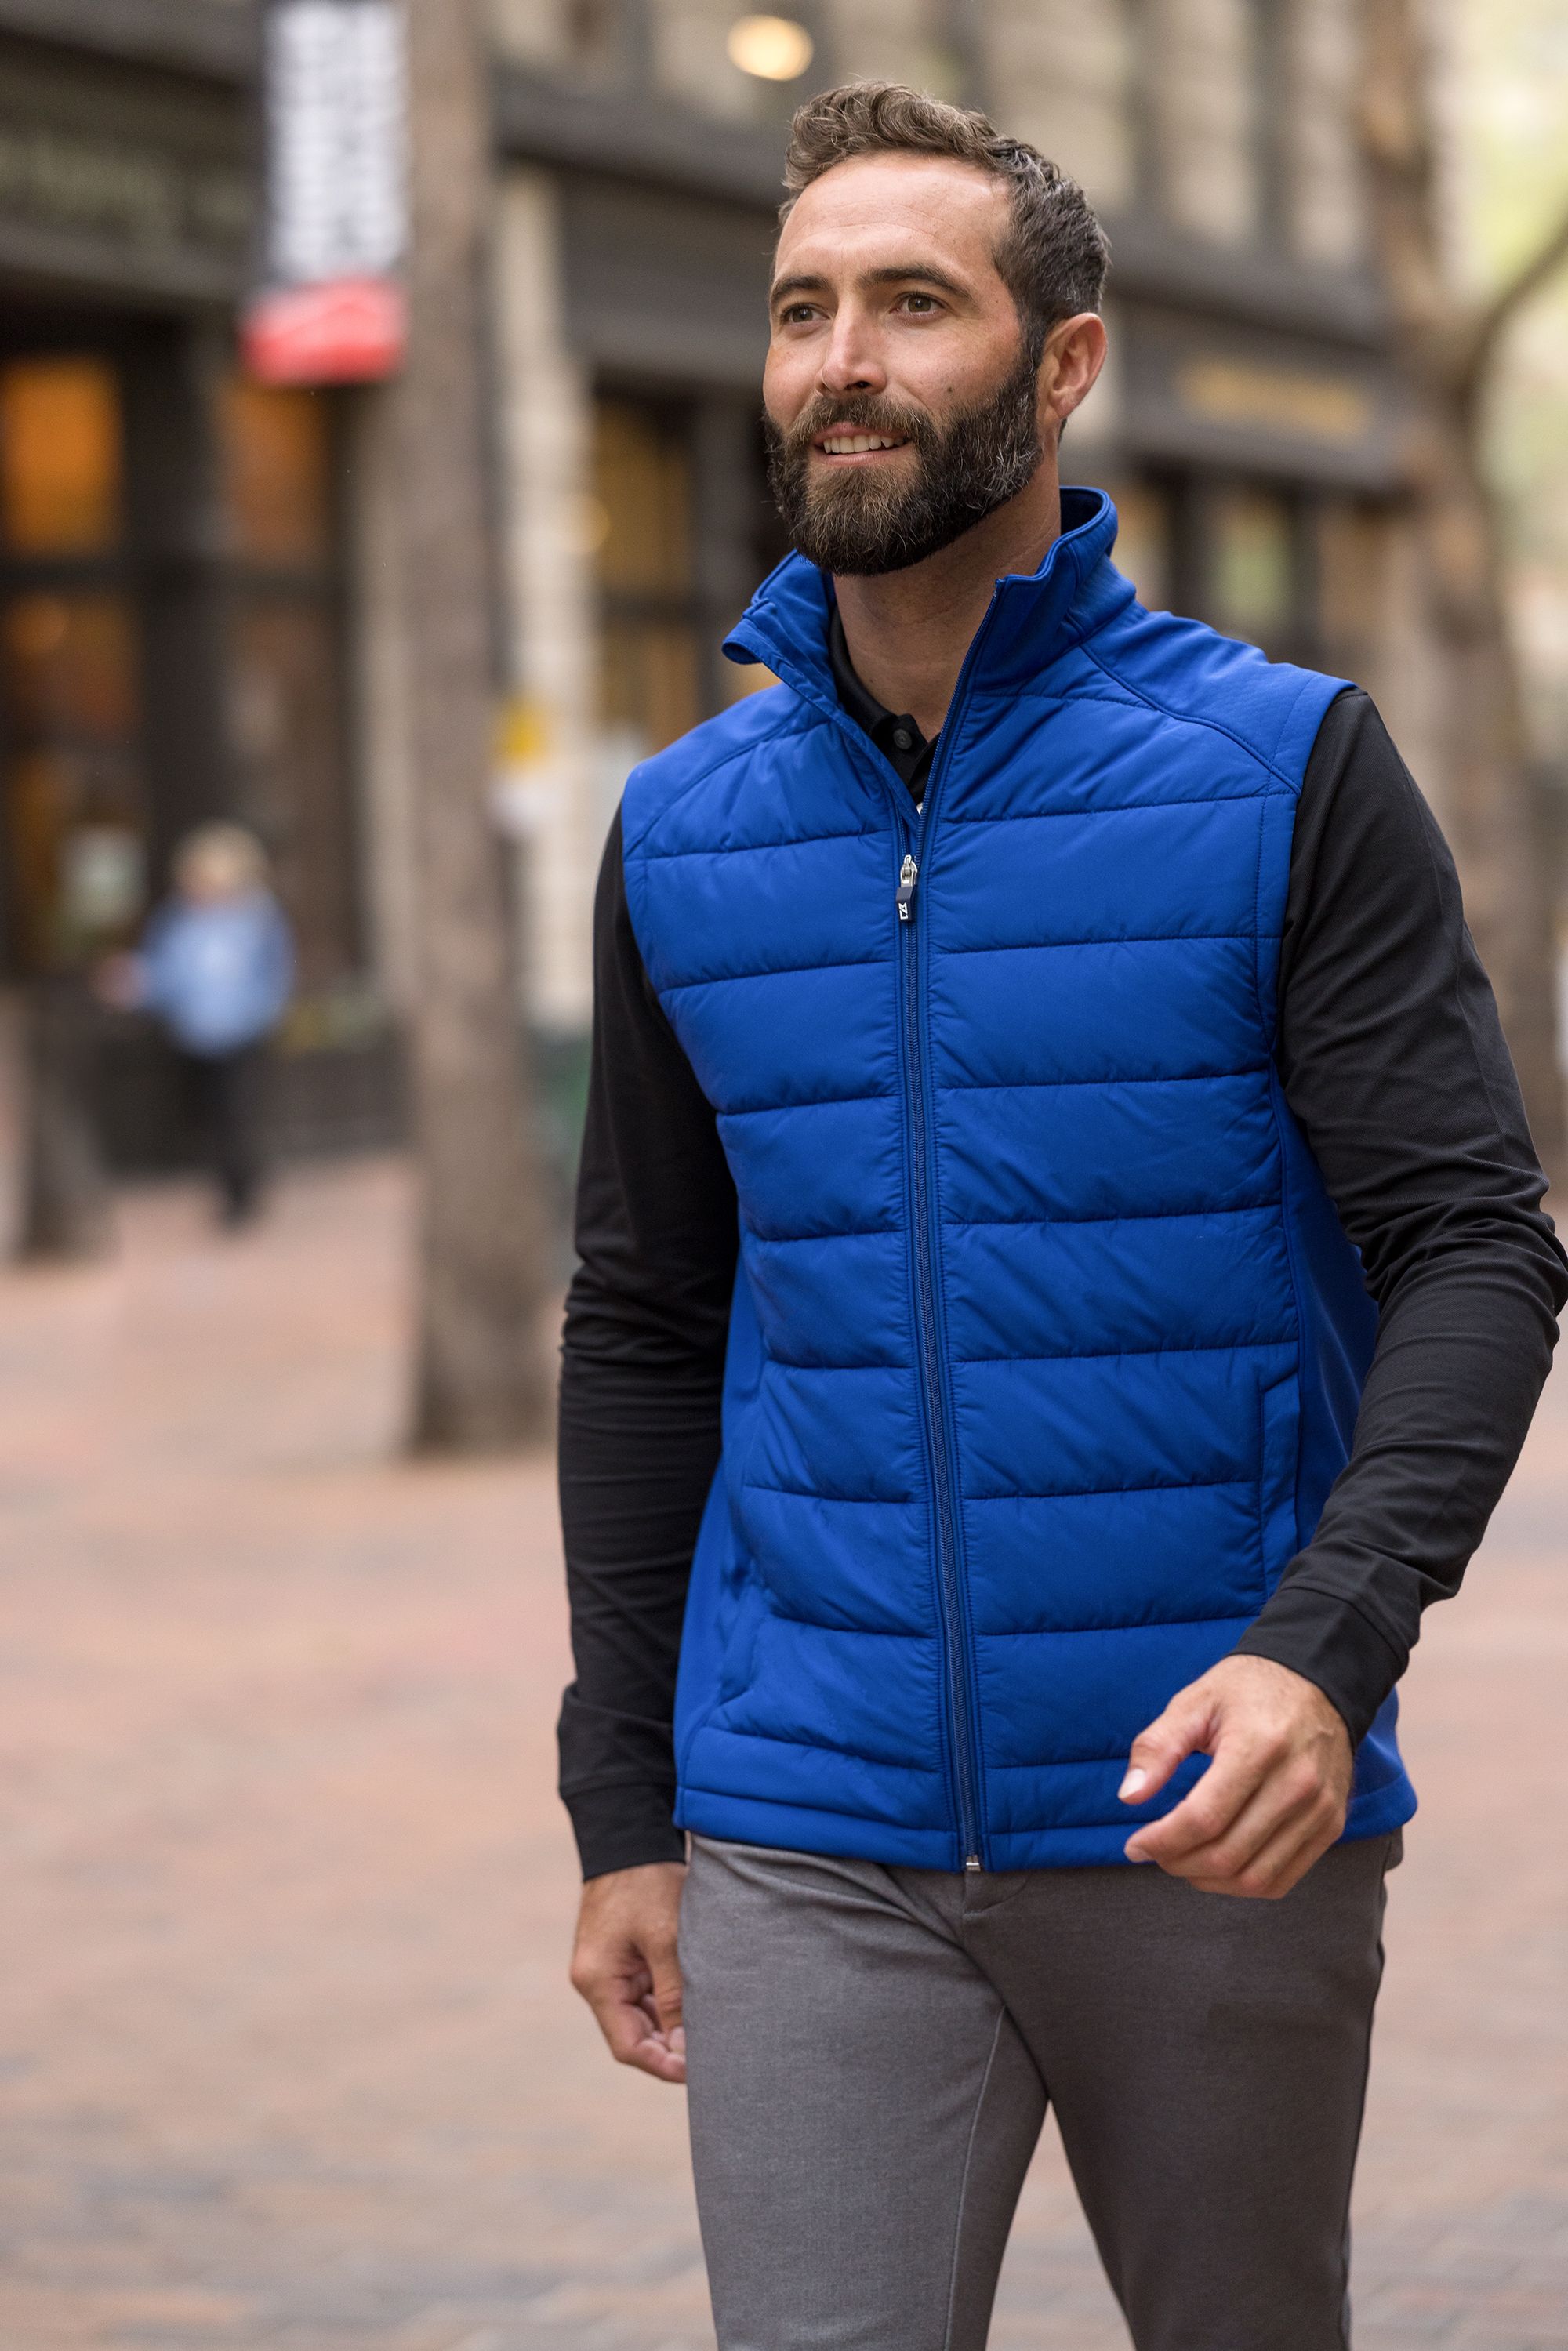 Invest in These 5 Mens Vests This Fall